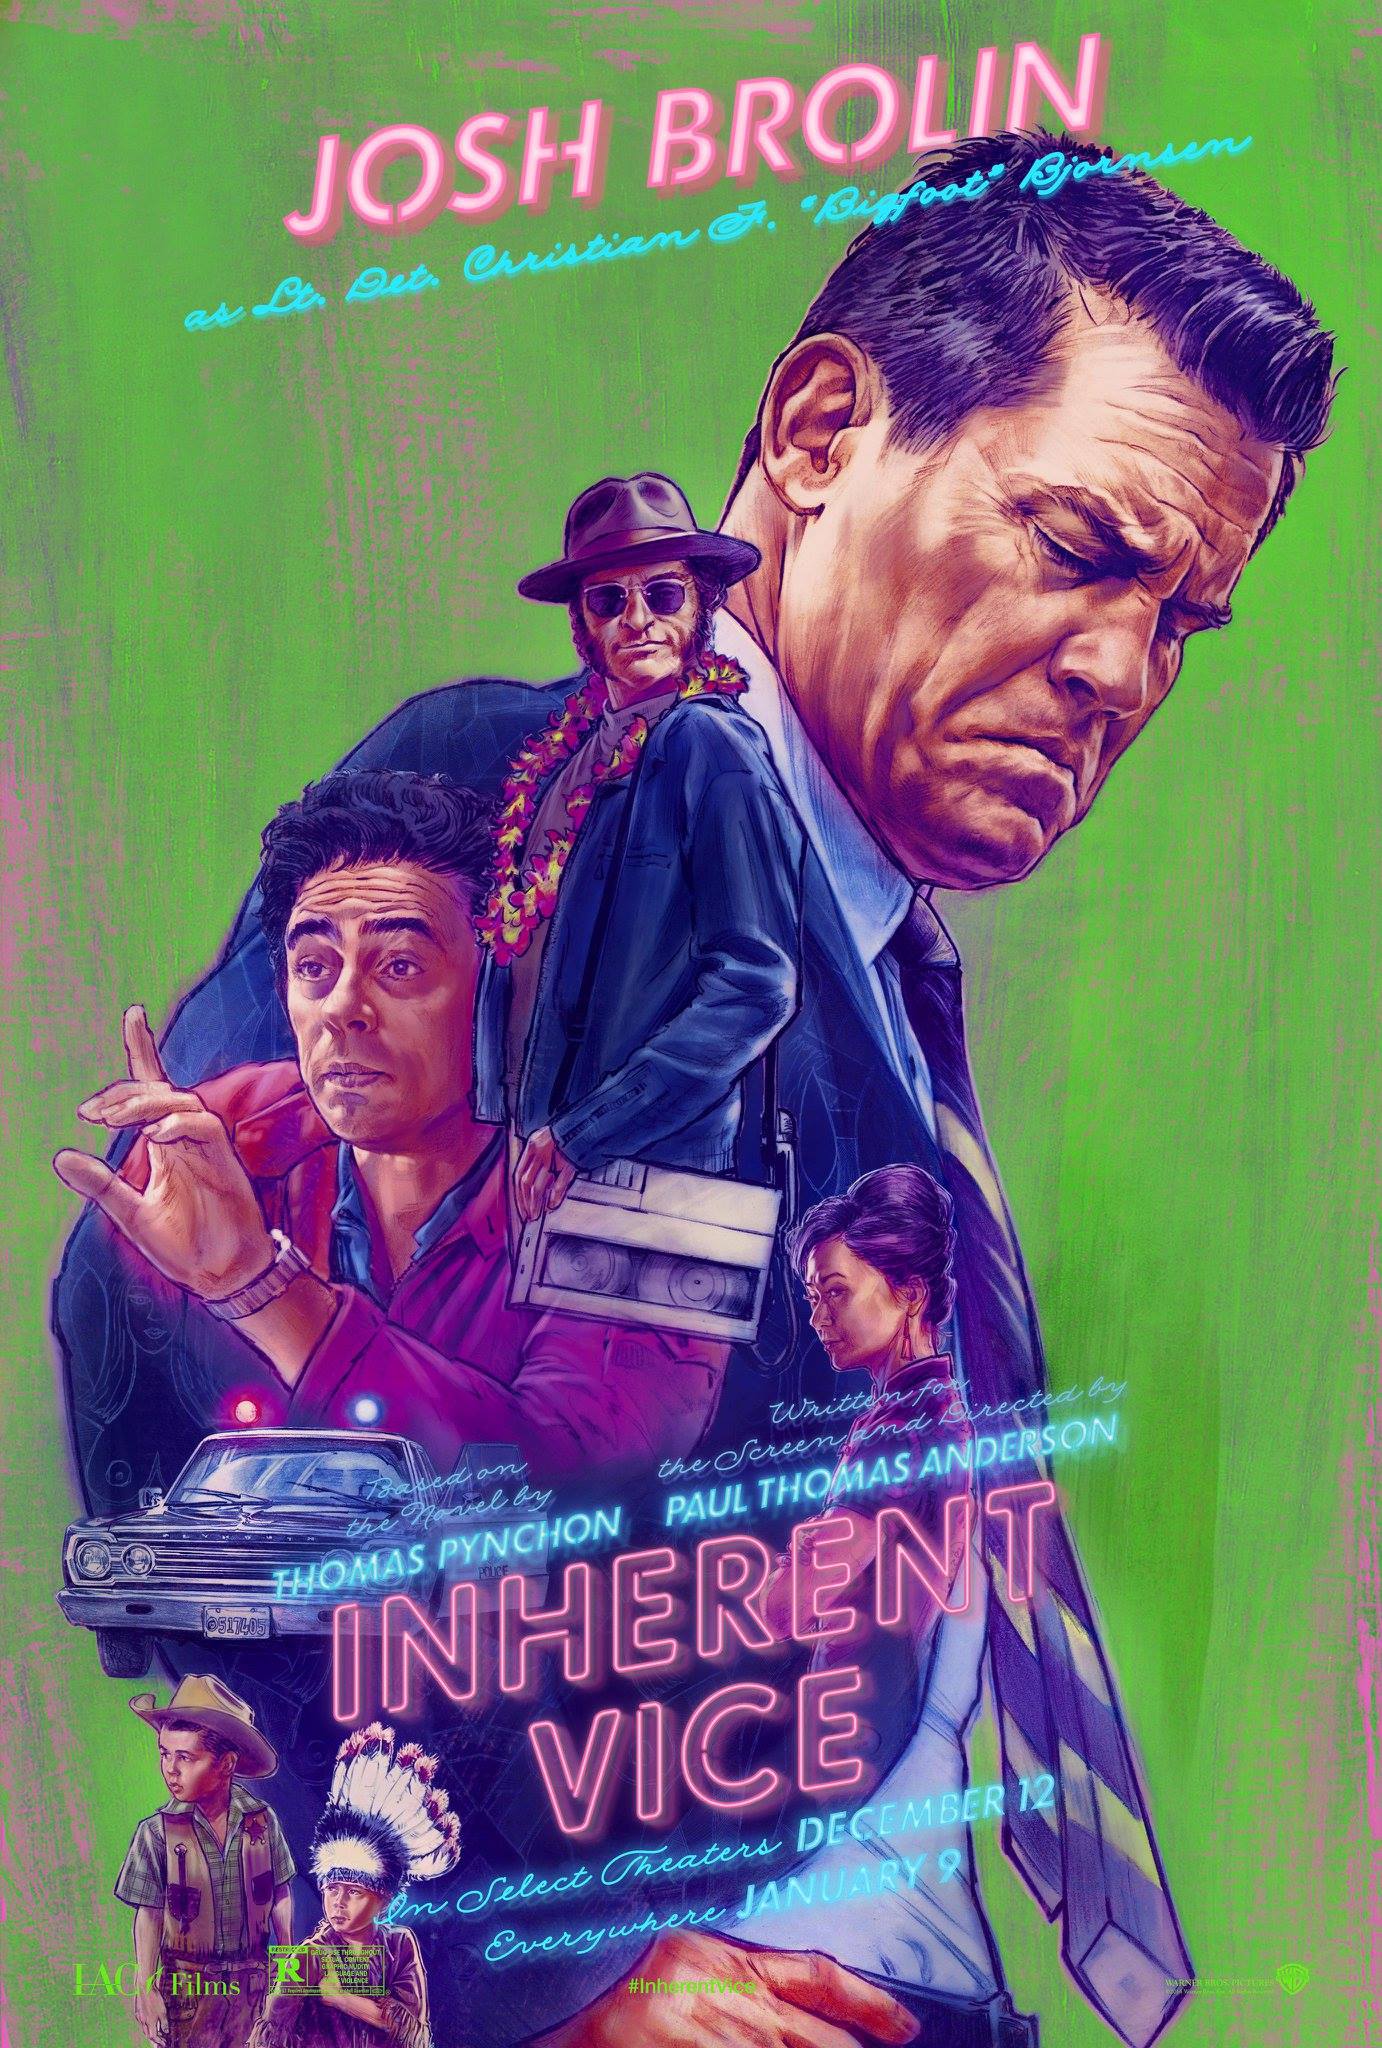 inherent vice online streaming